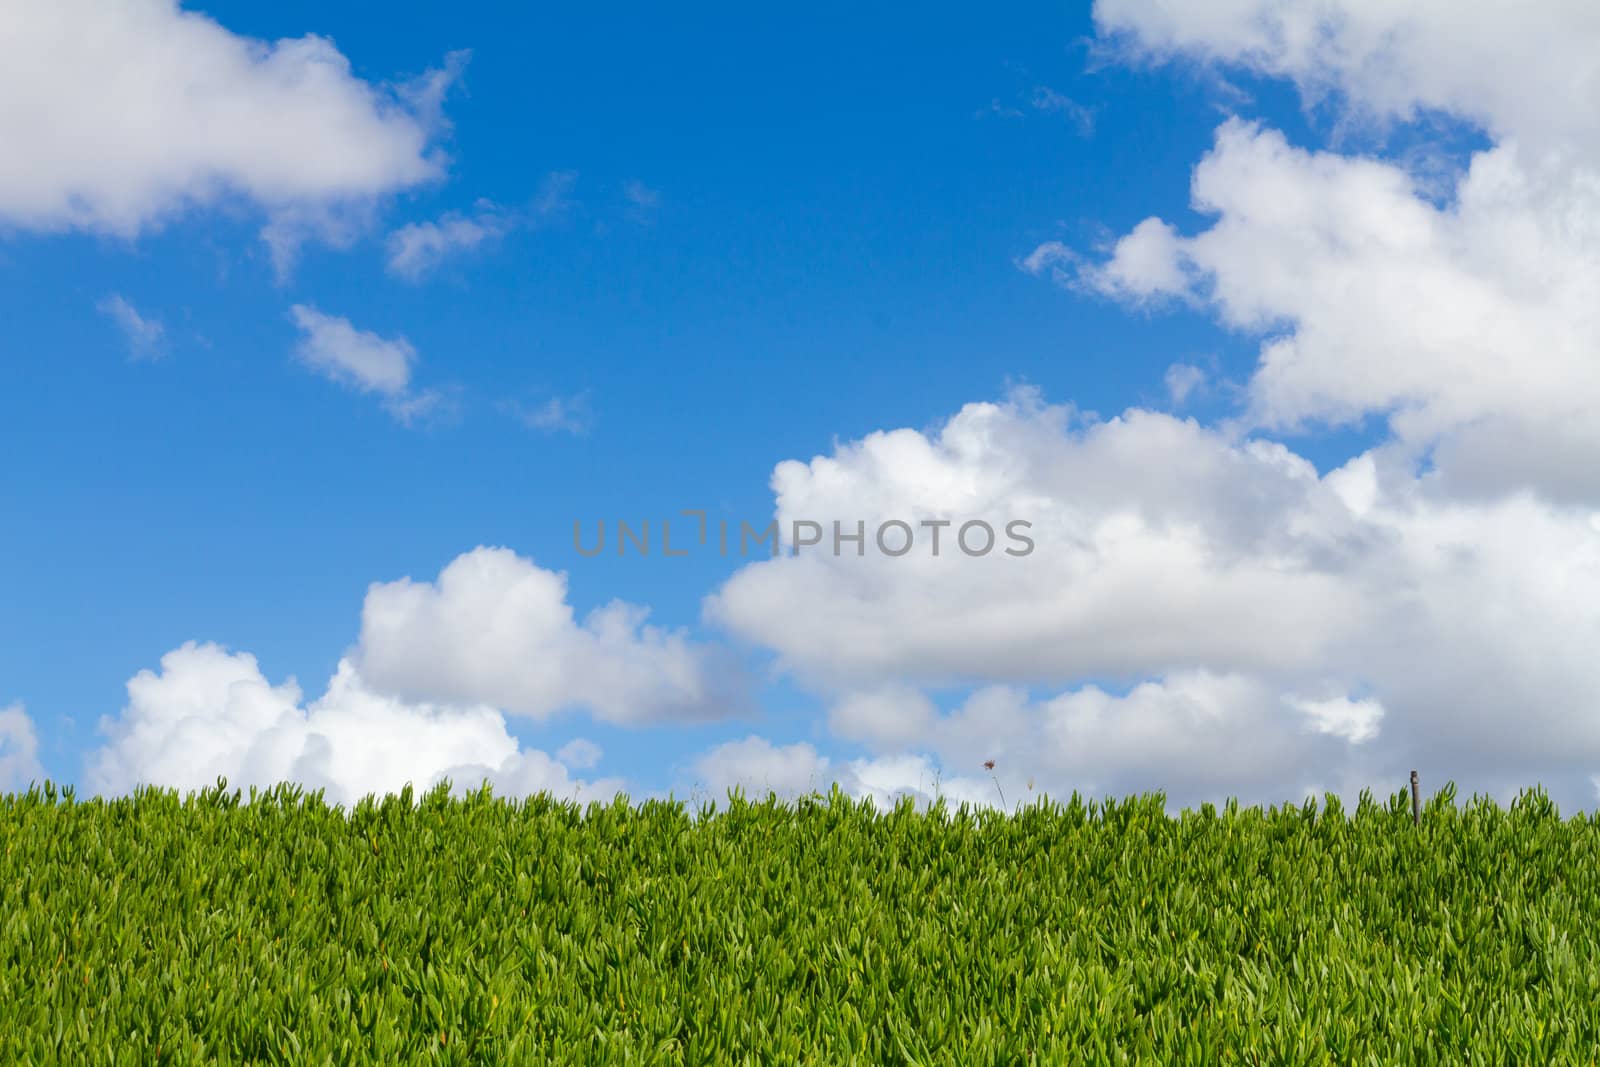 This unique abstract image shows a hedge of tropical vegetation plants and some blue sky along with clouds. This is a great image for copyspace and design purposes.